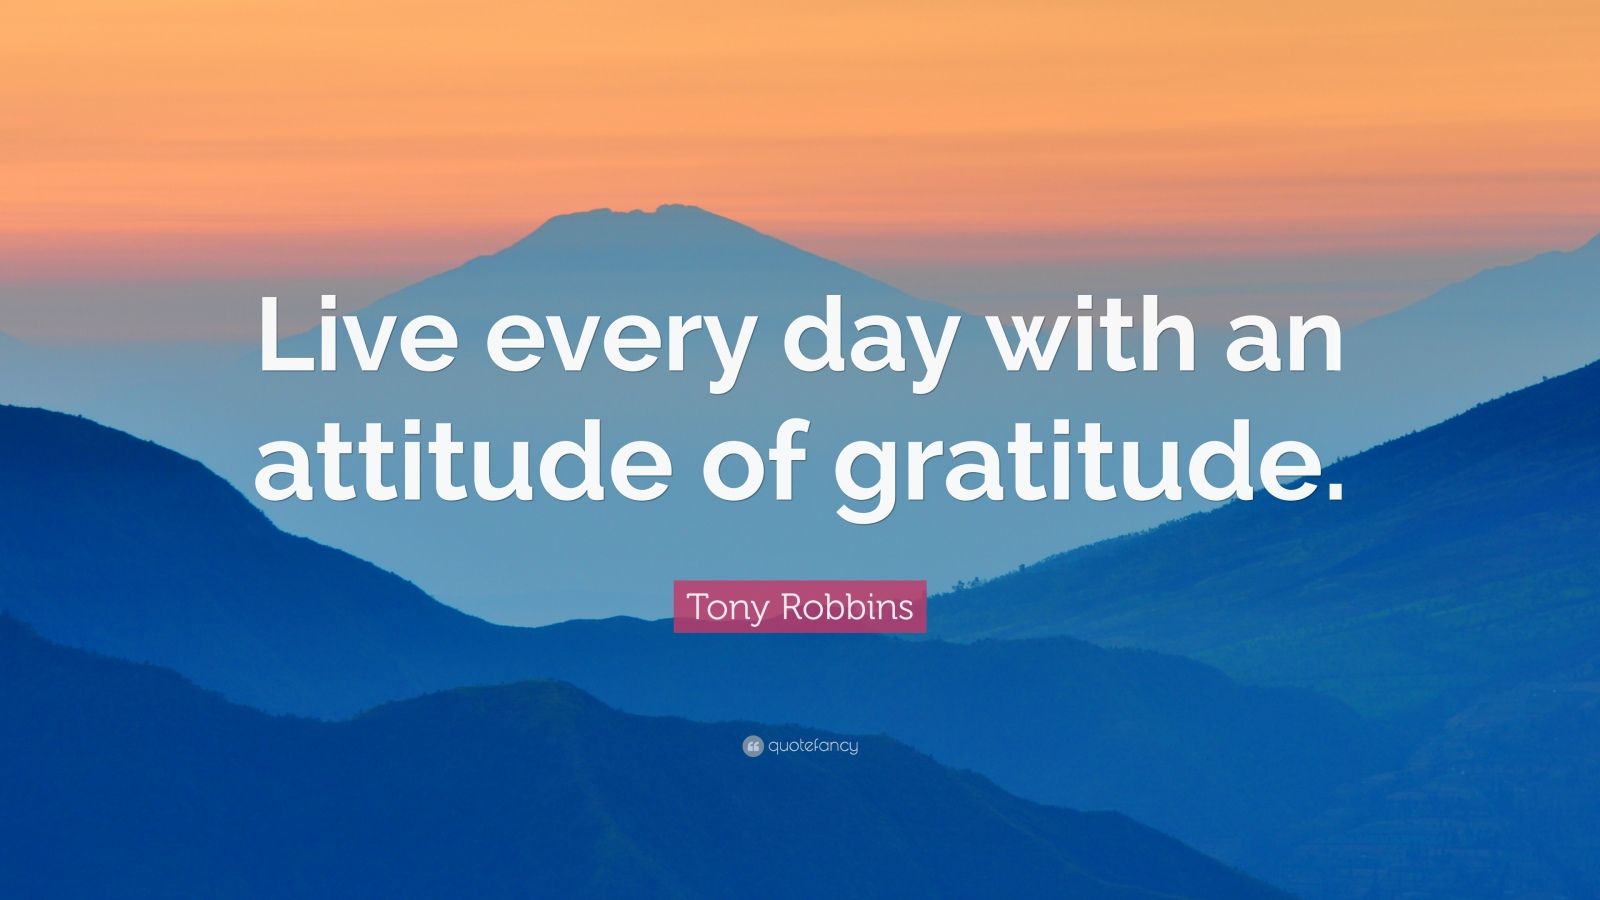 Tony Robbins Quote “Live every day with an attitude of gratitude.” (12